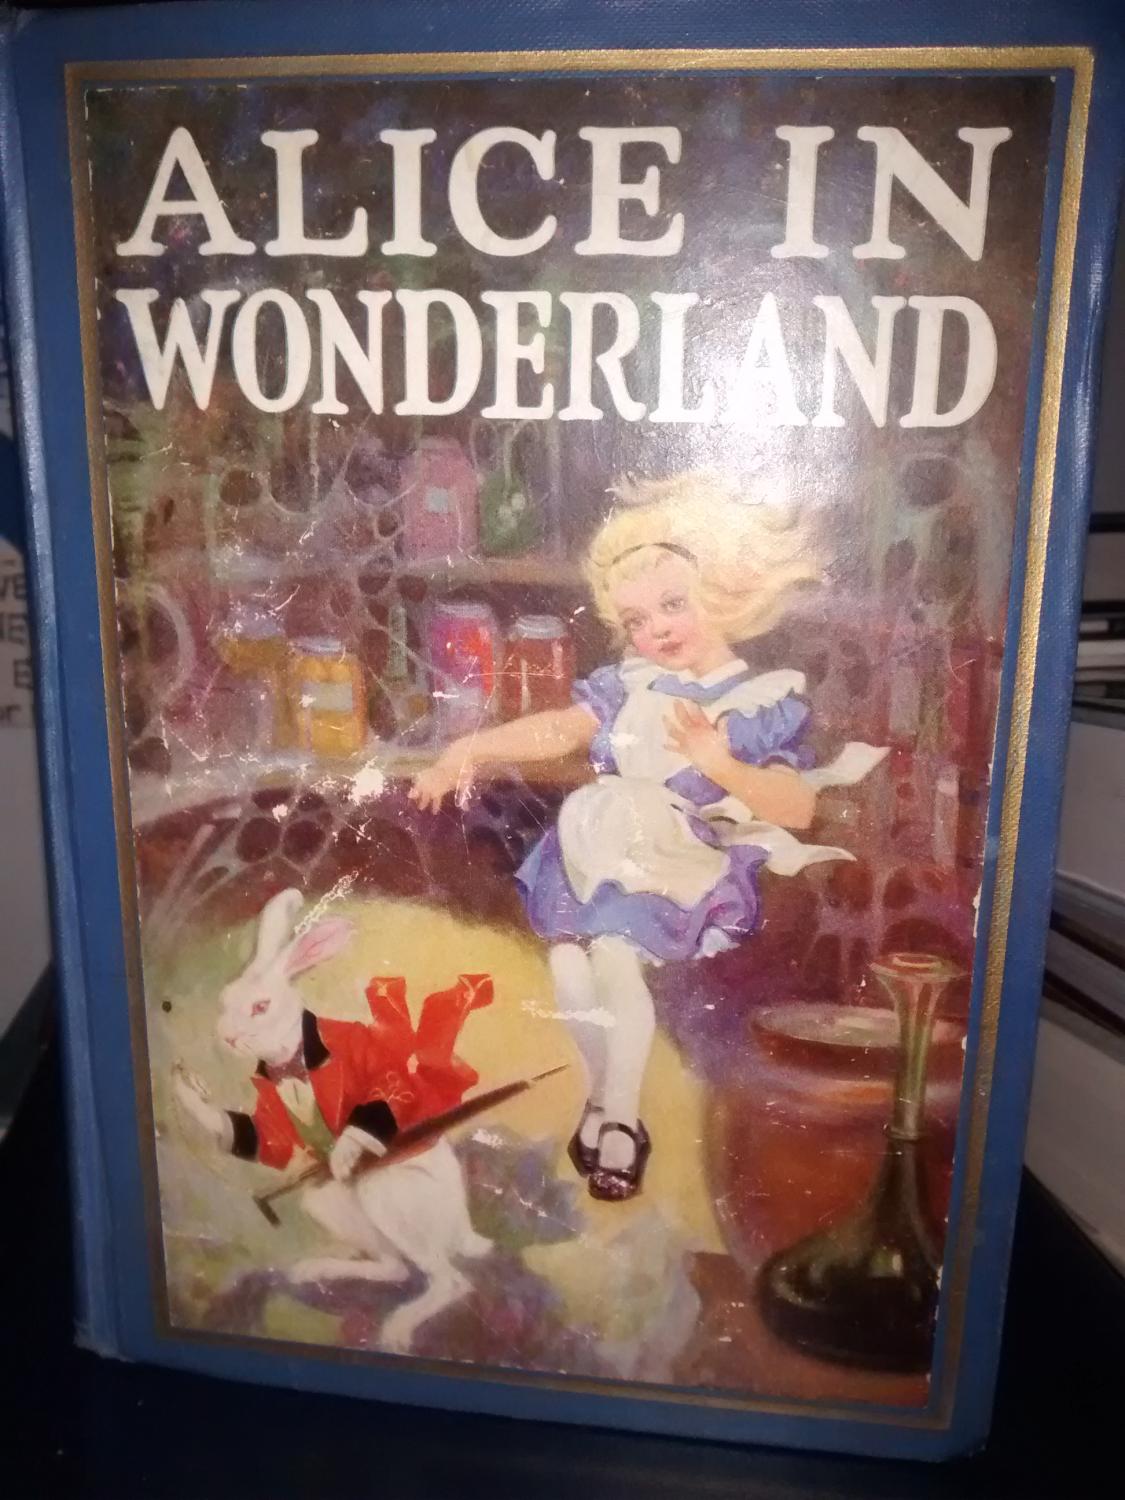 Alice in wonderland and through the looking glass book value Alice In Wonderland Through The Looking Glass By Lewis Carroll Fair Hard Cover 1923 Later American Edition Paraphernalia Books N Stuff